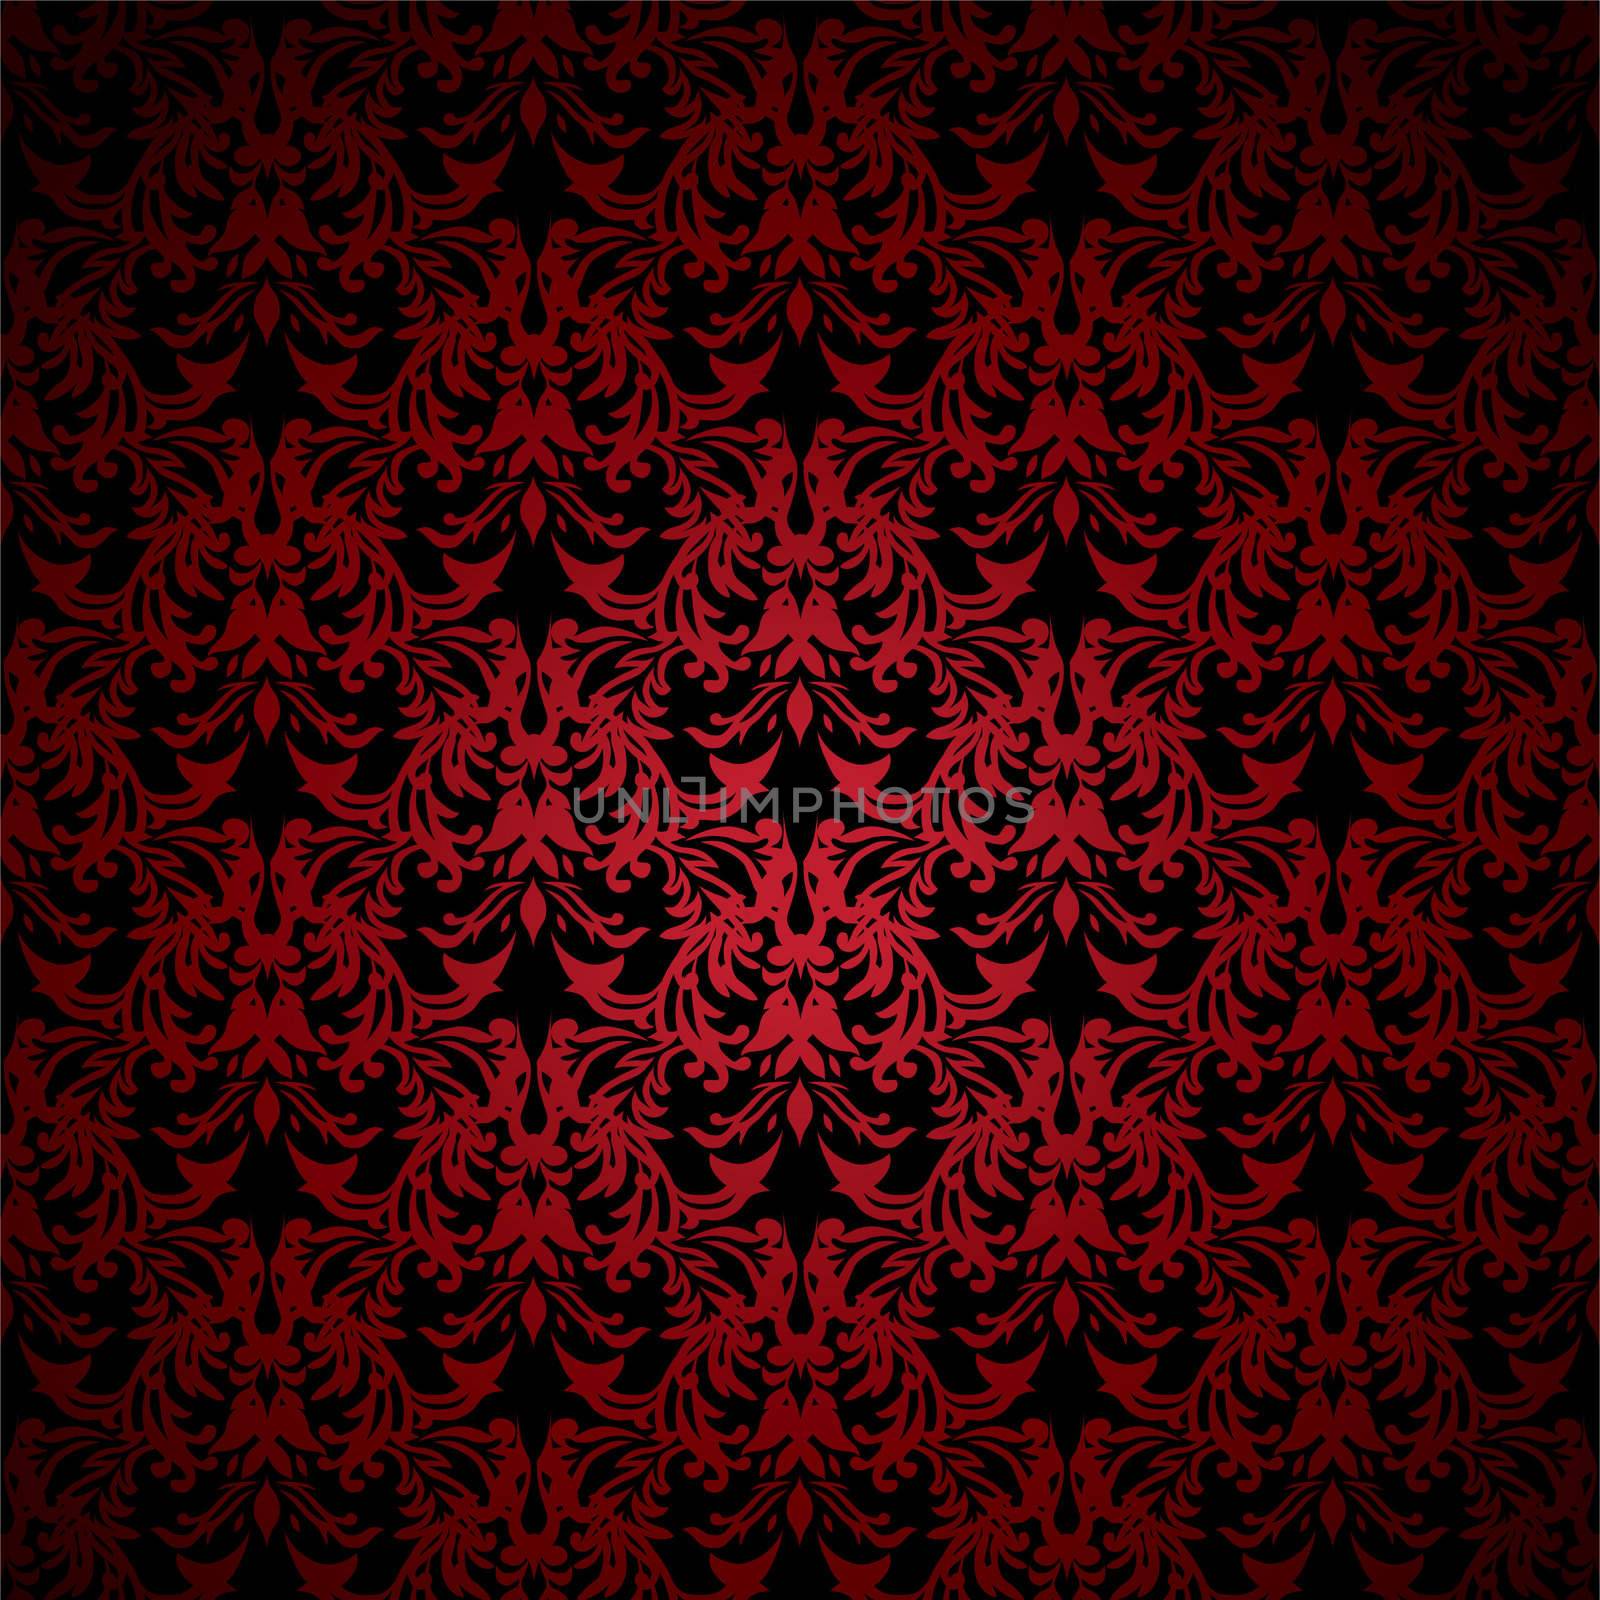 Red and black floral inspired background that seamlessly tiles